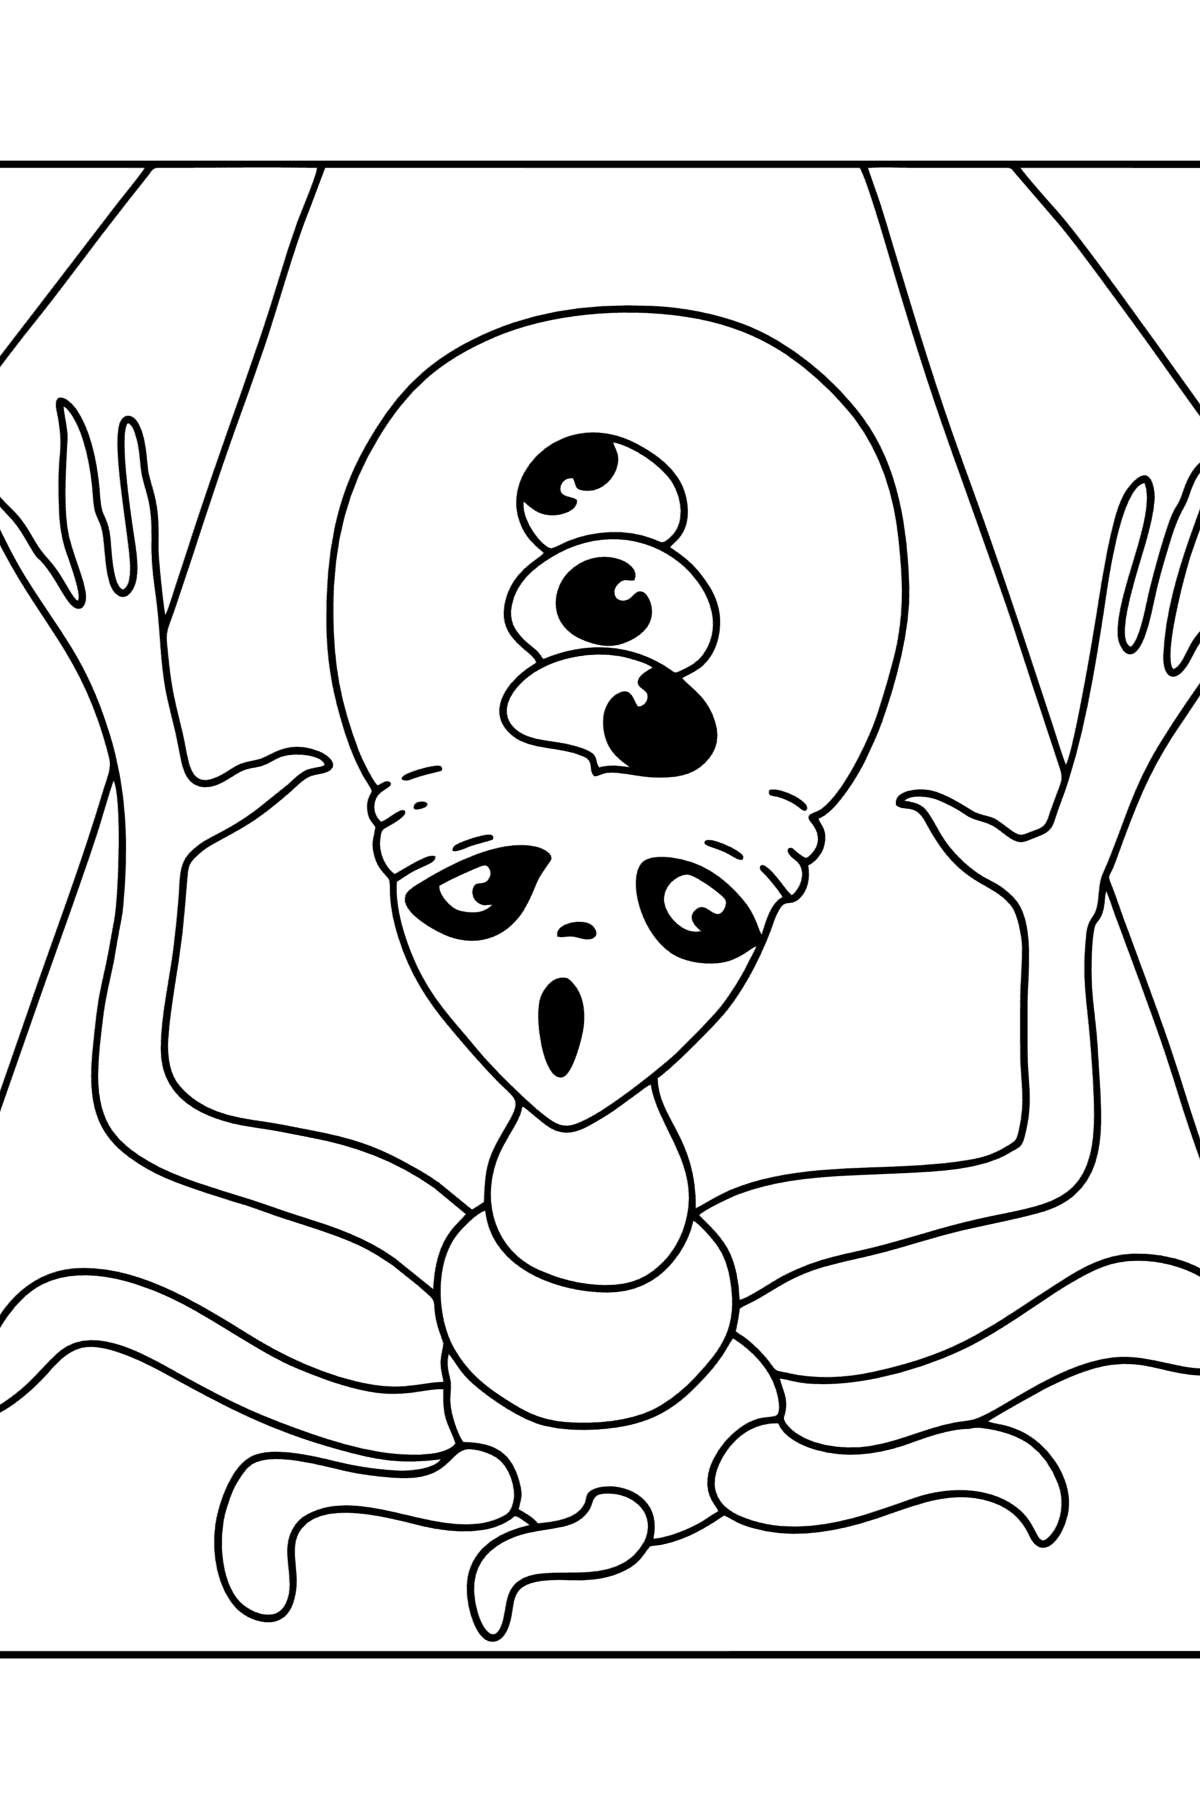 Scary Alien Coloring page - Coloring Pages for Kids